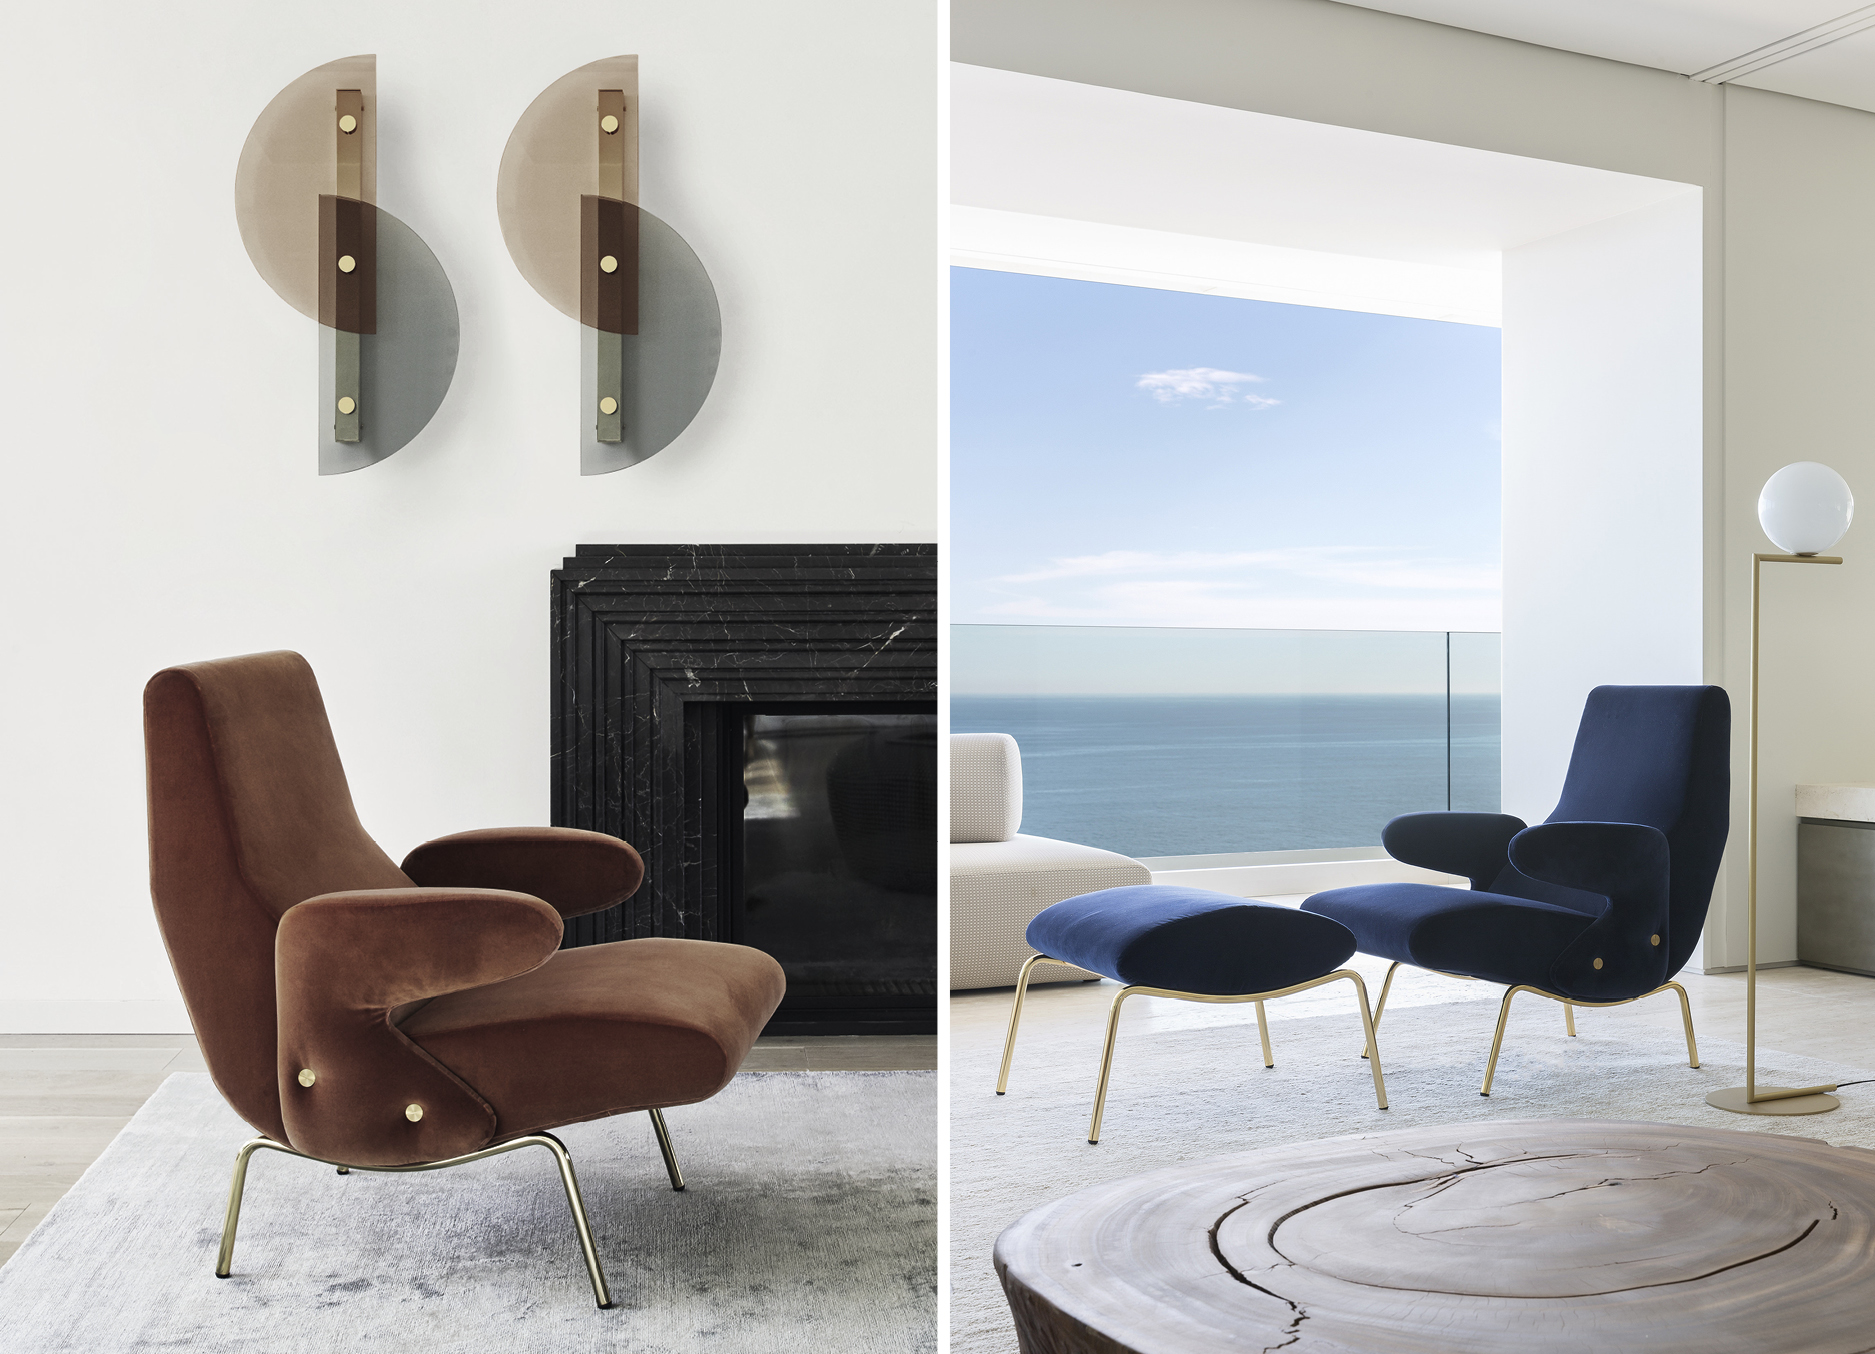 Meet the iconic chairs that every discerning interior needs